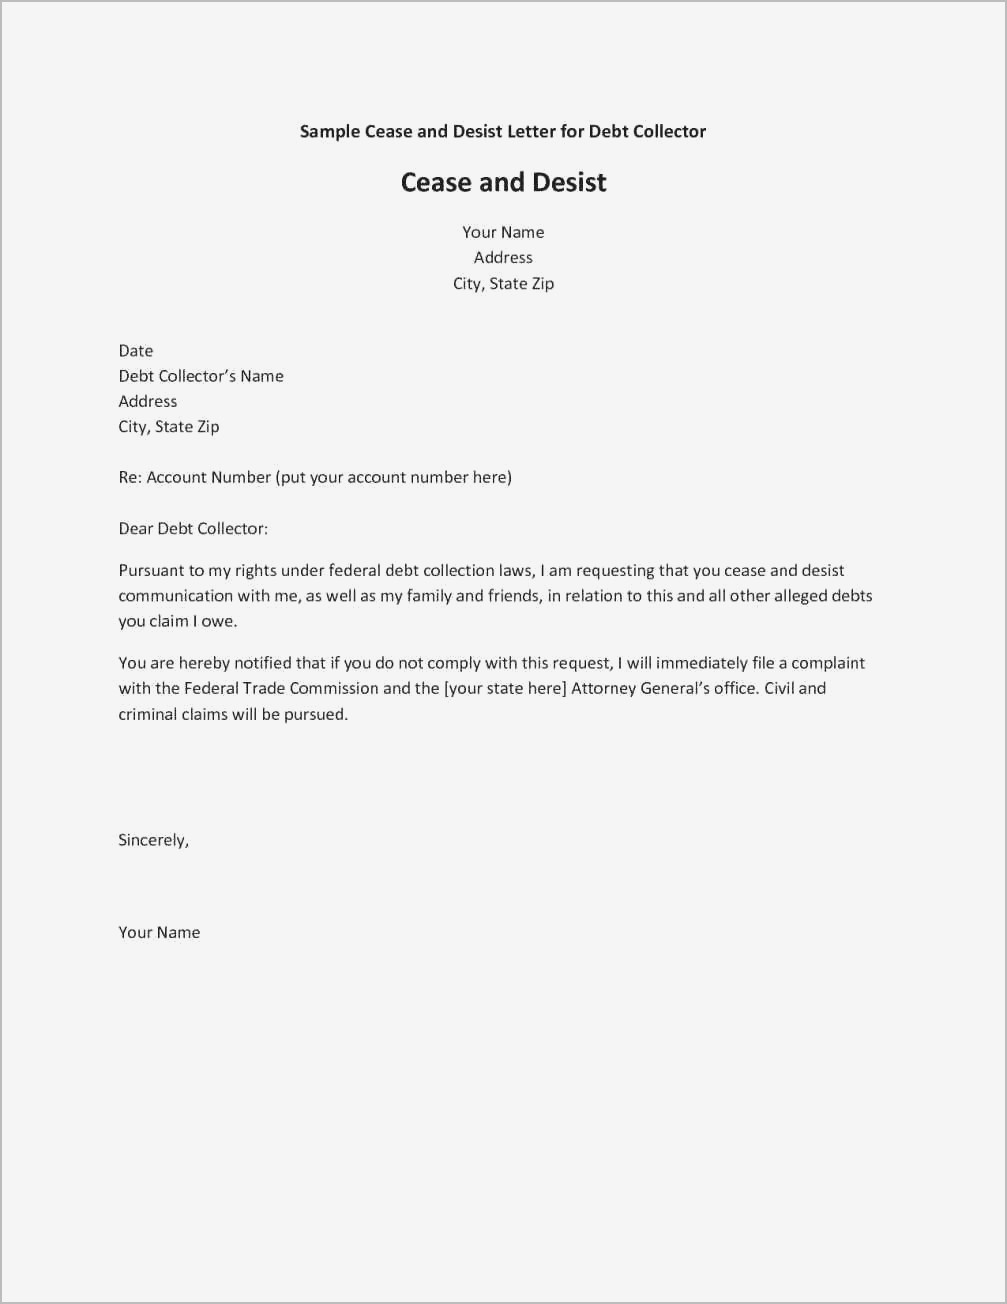 Response to Cease and Desist Letter Template - Inspirational Cease and Desist Letter Example Your Template